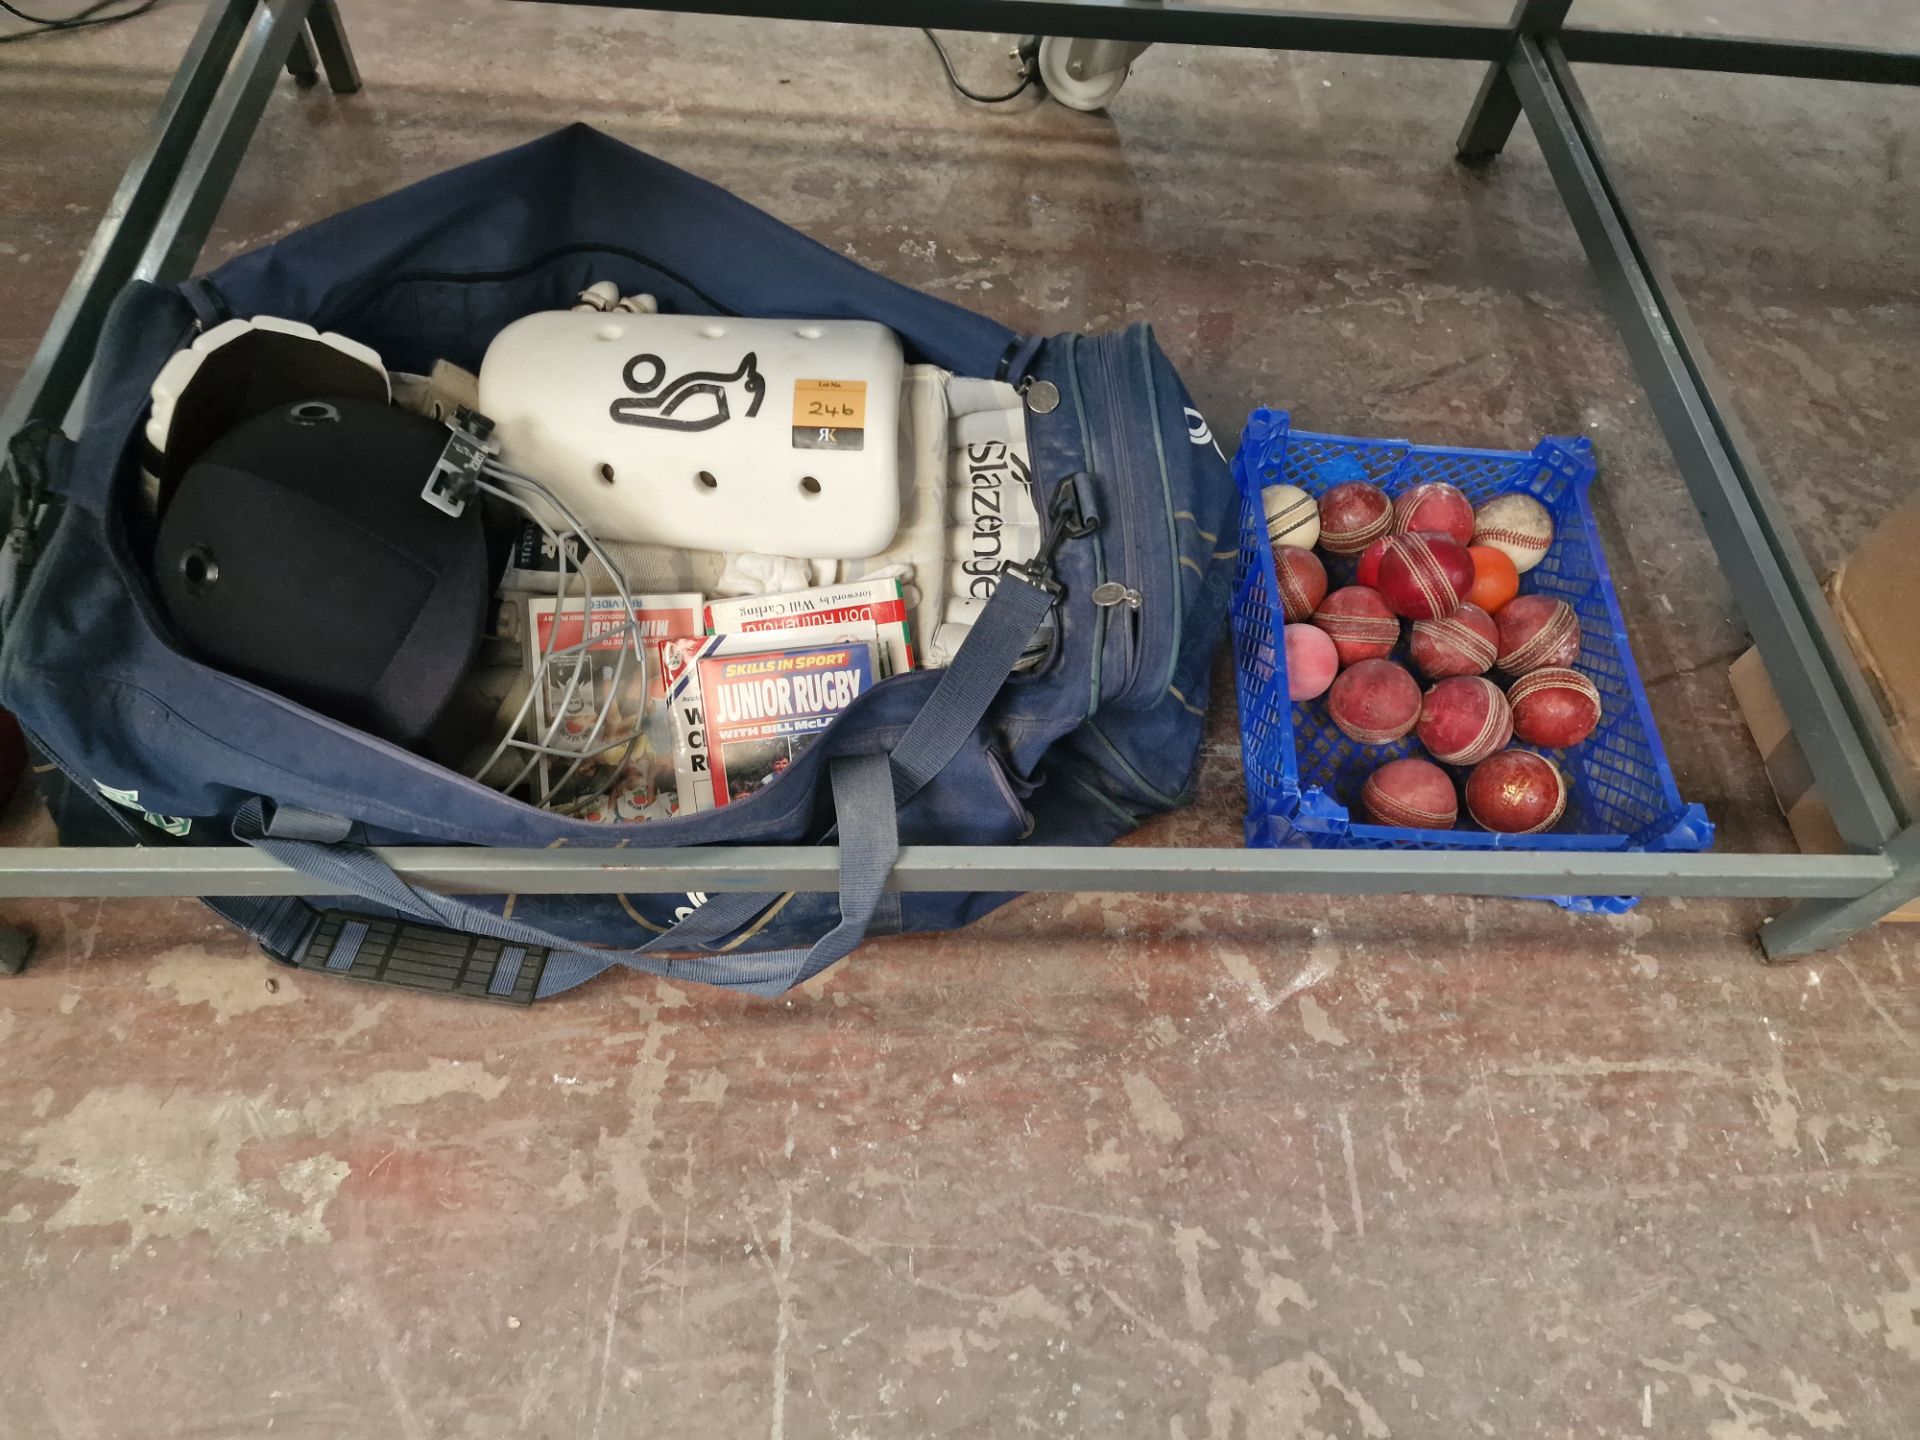 Quantity of cricket related items including protective clothing, carry bag, cricket balls and more